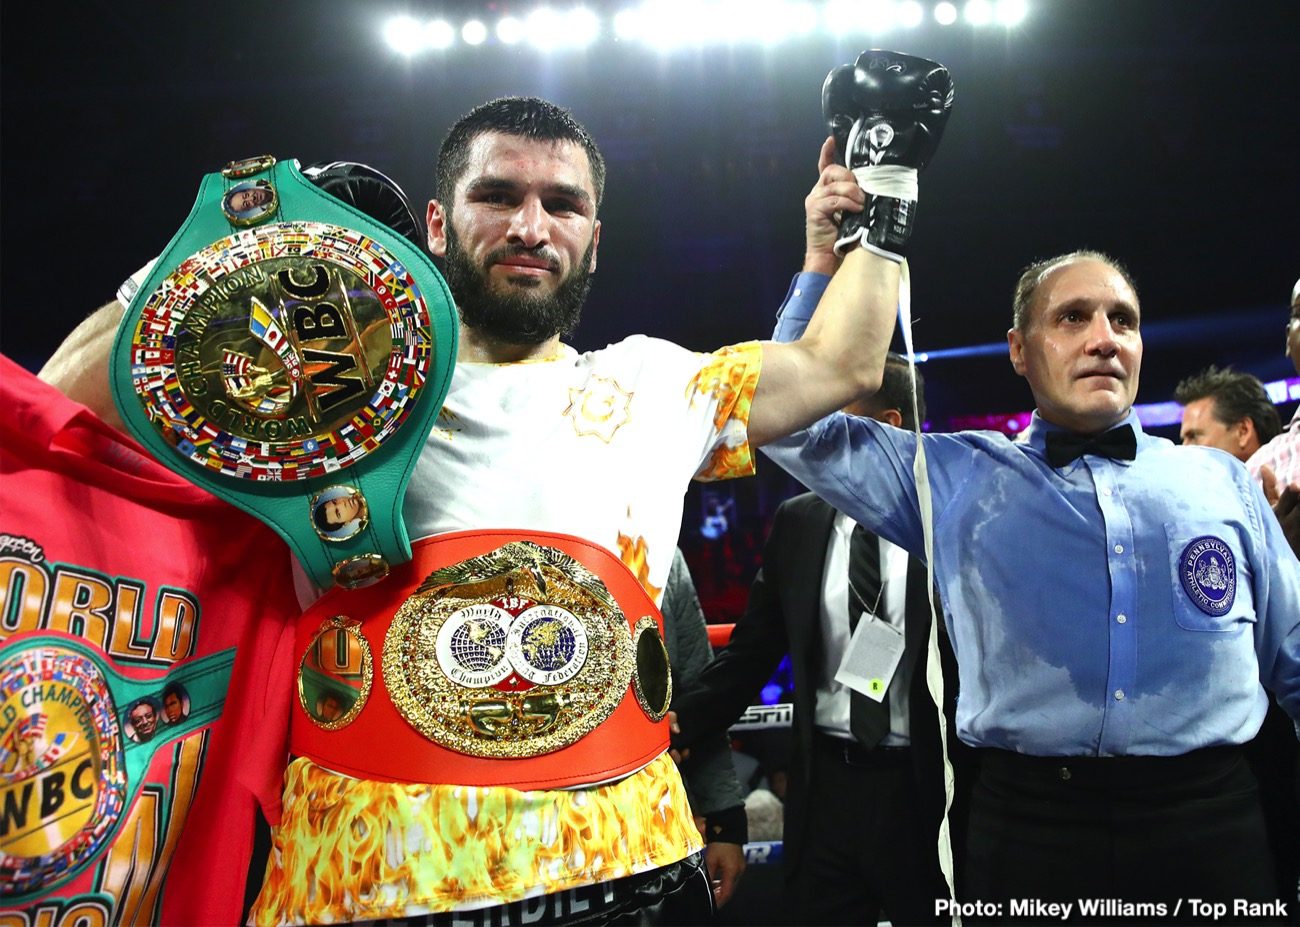 Image: Artur Beterbiev would be "strong threat" to Canelo Alvarez - says Mauricio Sulaiman